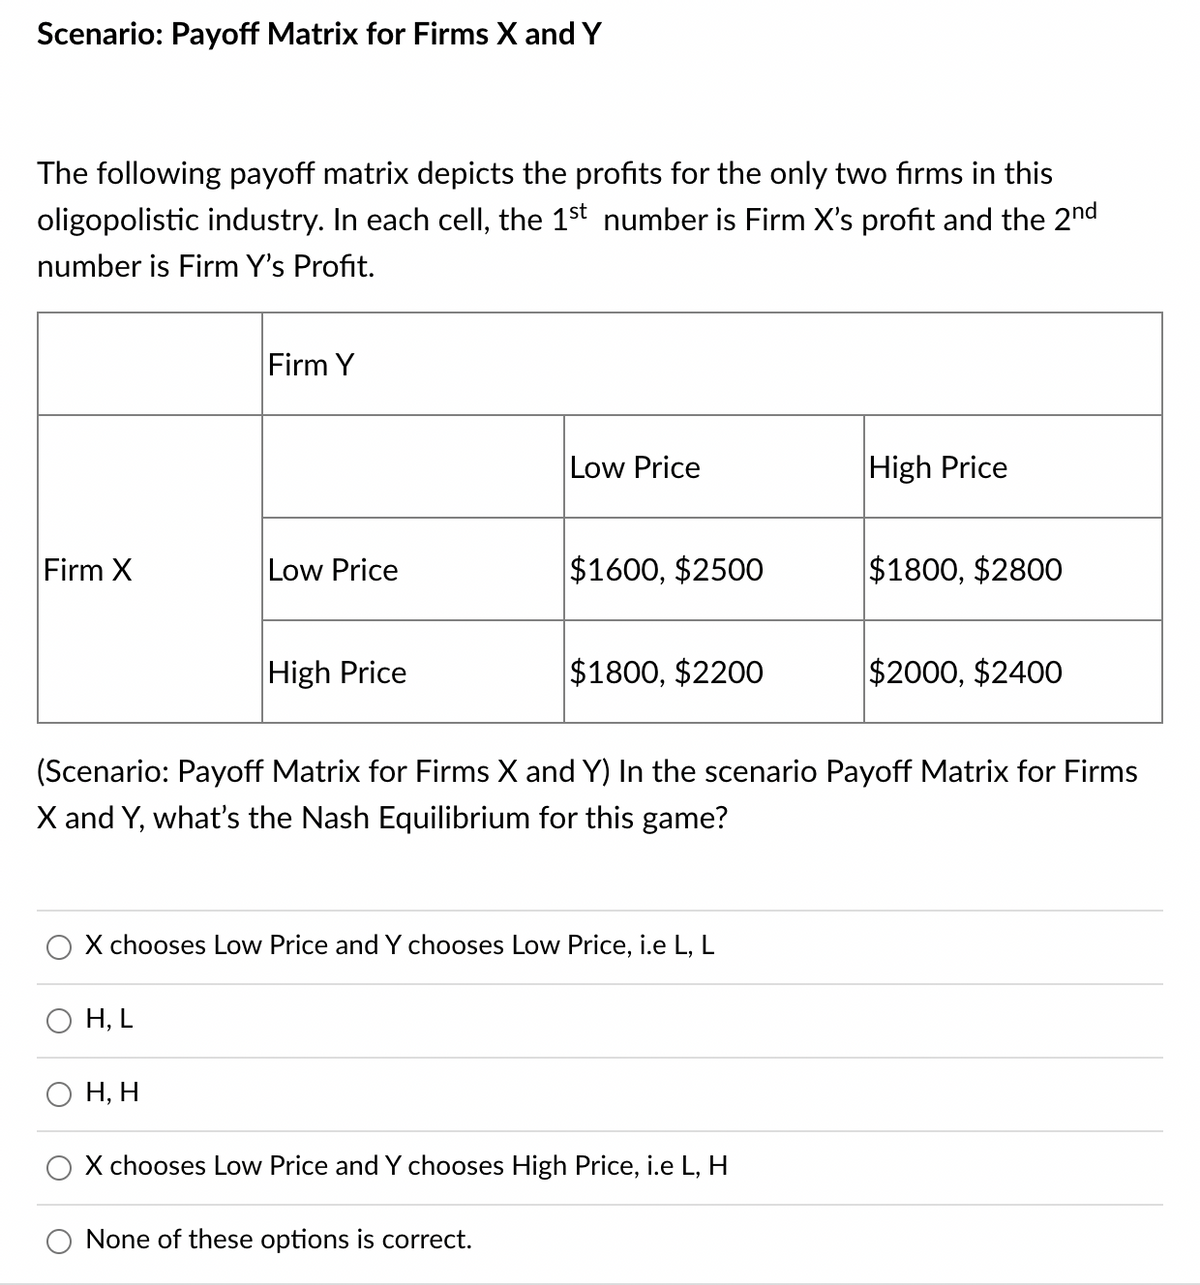 Scenario: Payoff Matrix for Firms X and Y
The following payoff matrix depicts the profits for the only two firms in this
oligopolistic industry. In each cell, the 1st number is Firm X's profit and the 2nd
number is Firm Y's Profit.
Firm Y
Low Price
High Price
Firm X
Low Price
$1600, $2500
$1800, $2800
High Price
$1800, $2200
$2000, $2400
(Scenario: Payoff Matrix for Firms X and Y) In the scenario Payoff Matrix for Firms
X and Y, what's the Nash Equilibrium for this game?
X chooses Low Price and Y chooses Low Price, i.e L, L
H, L
Н, Н
X chooses Low Price and Y chooses High Price, i.e L, H
O None of these options is correct.
